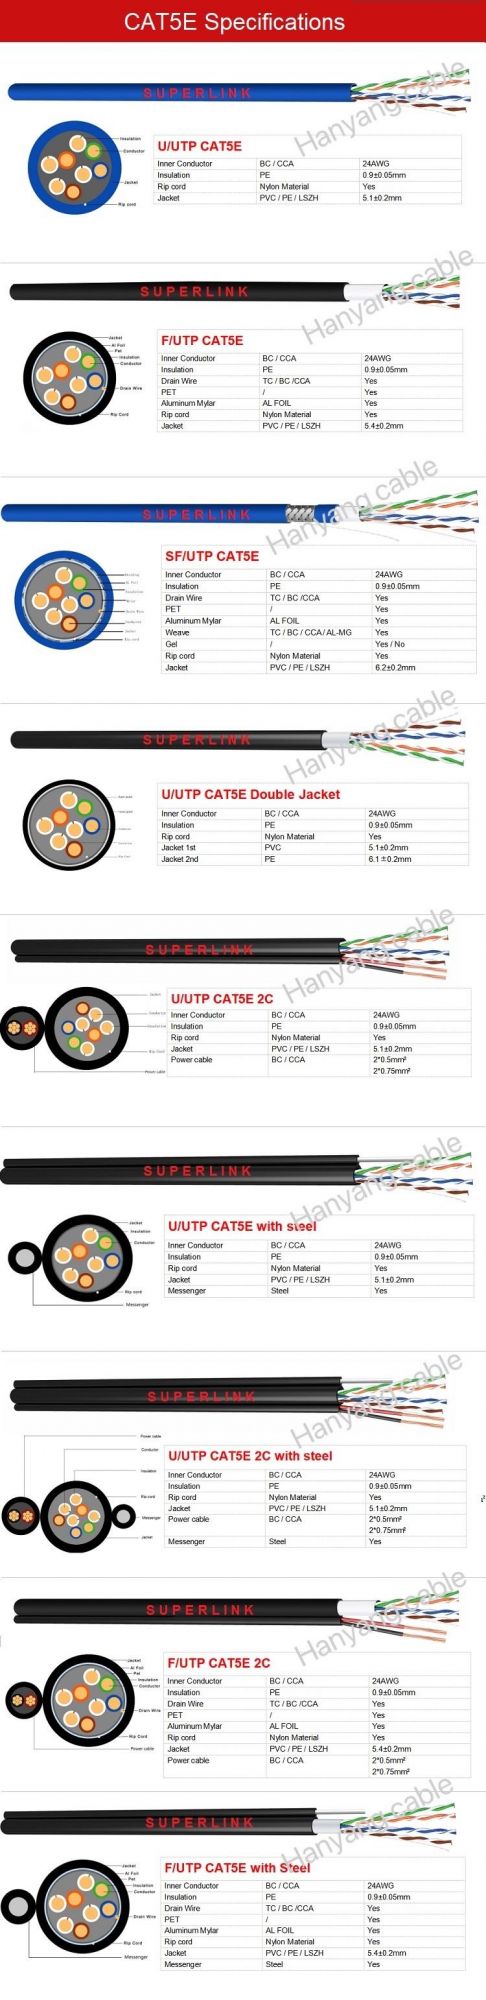 LAN Cable Outdoor Double Jacket Cat5e UTP Cable 24 AWG 4 Pair Copper Cable Cat 5 Network Cable